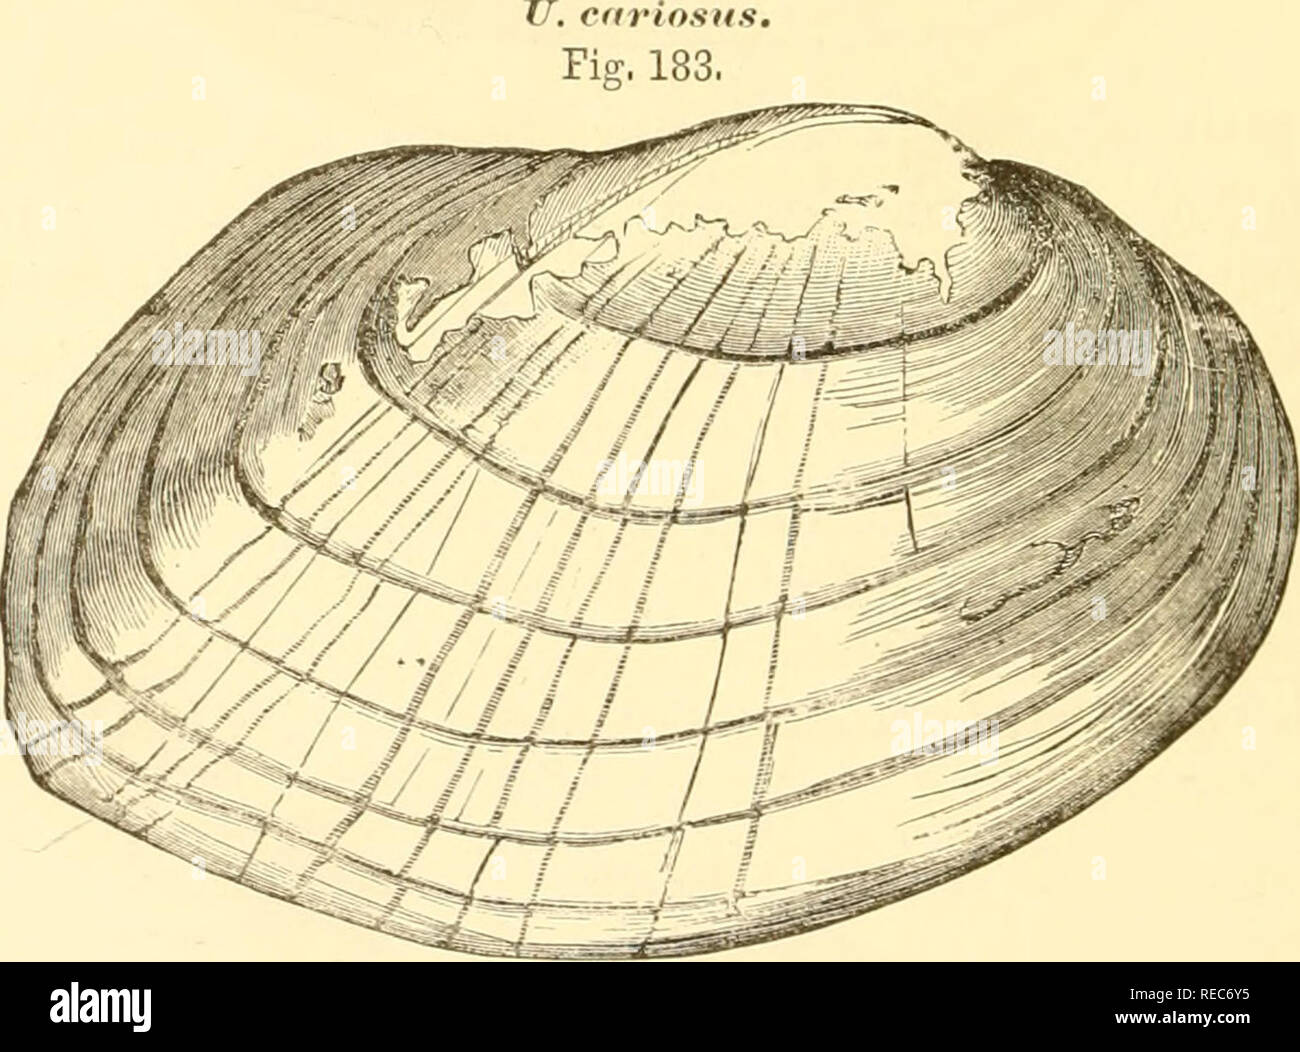 . Conchologia cestrica. The molluscous animals and their shells, of Chester county, Pa. Mollusks. 88 CONCHOLOGIA CESTRICA, narrow, rounded; posterior, broad and rounded; dorsal margin elevated behind the hinge; inferior curved; beaks moderate ; epidermis mostly greenish - yellow, with numerous broad, dark-green rays; interior yellow- ish, and iridescent; cardinal teeth bifid, crenulated, and oblique. H. 2-21^, W. 3-4, T. i-i&gt;i, inches. Station, Schuylkill River, Chester County. U. cariosus, Say, Nich. Encyc, ist Amer. Ed.„ 1816.. Shell, valves rather thin, sub-oval, inflated; hinge margin e Stock Photo